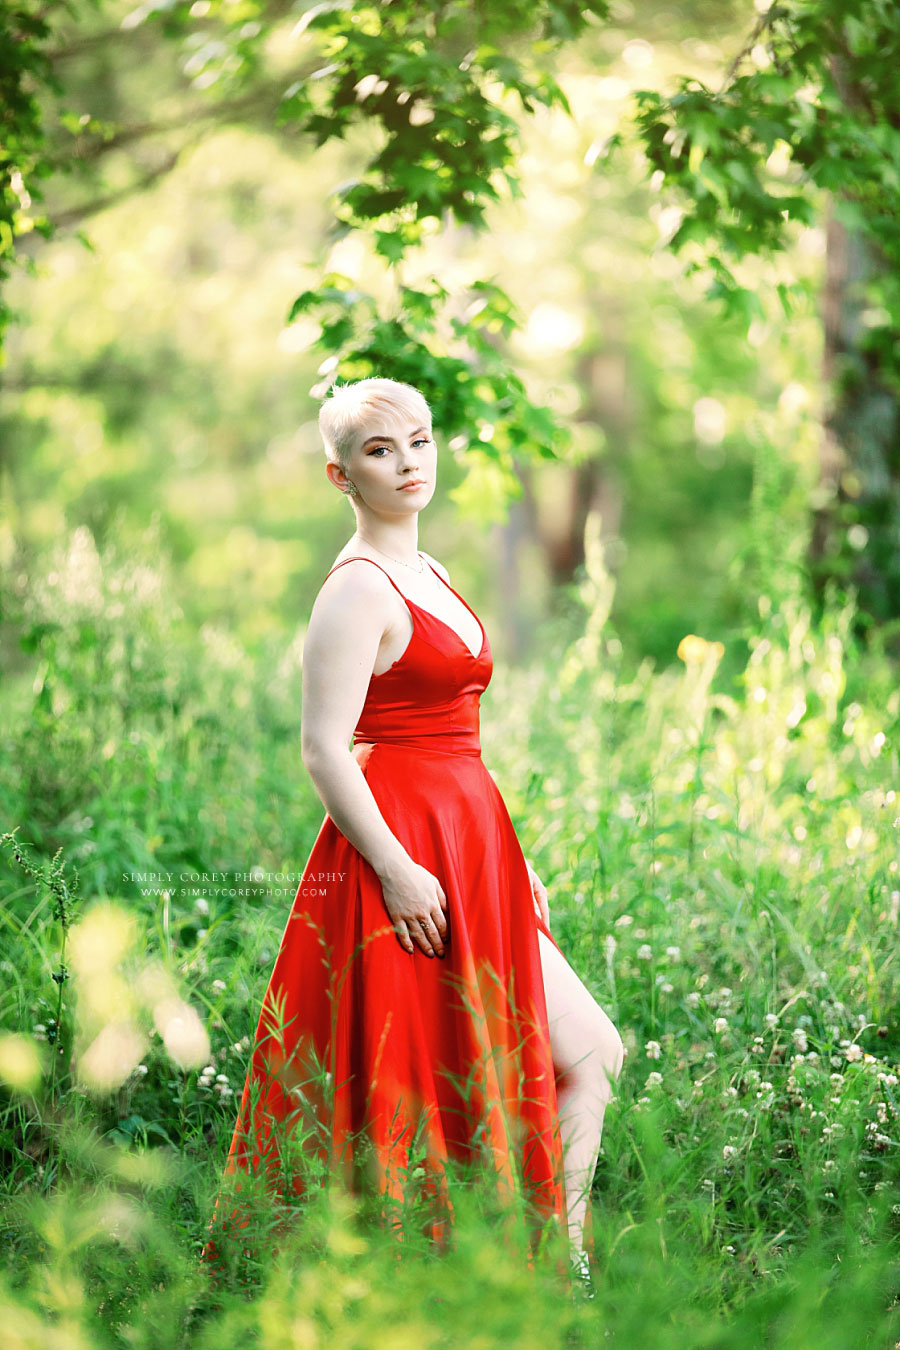 senior portrait photographer near Atlanta, teen with pixie cut in red formal dress outside